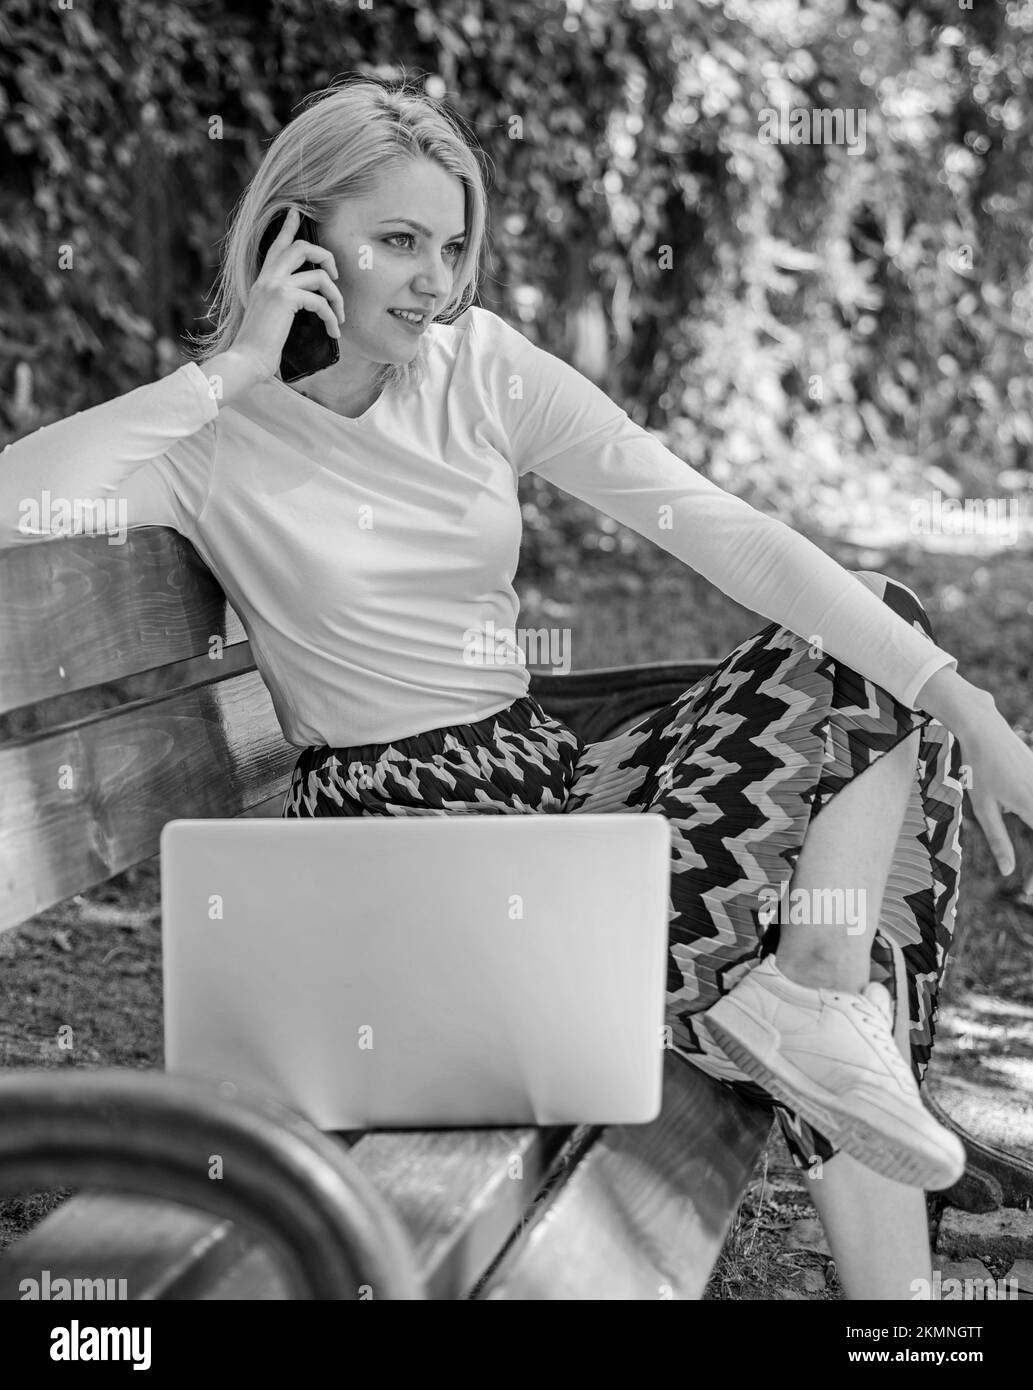 Girl dreamy takes advantage of online shopping. Girl sit bench with notebook call phone. Save your time with shopping online. Shopping online. Woman Stock Photo